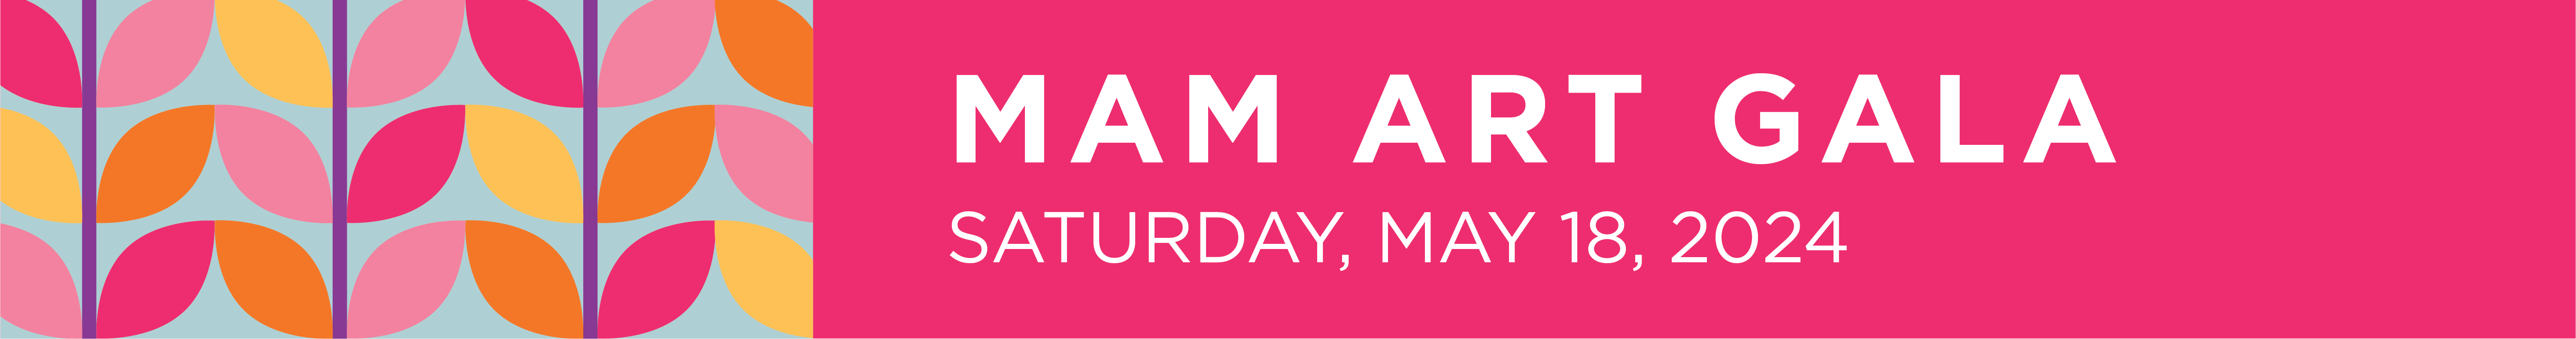 "MAM Art Gala: Saturday, May 18, 2024" (written in white text on pink background)